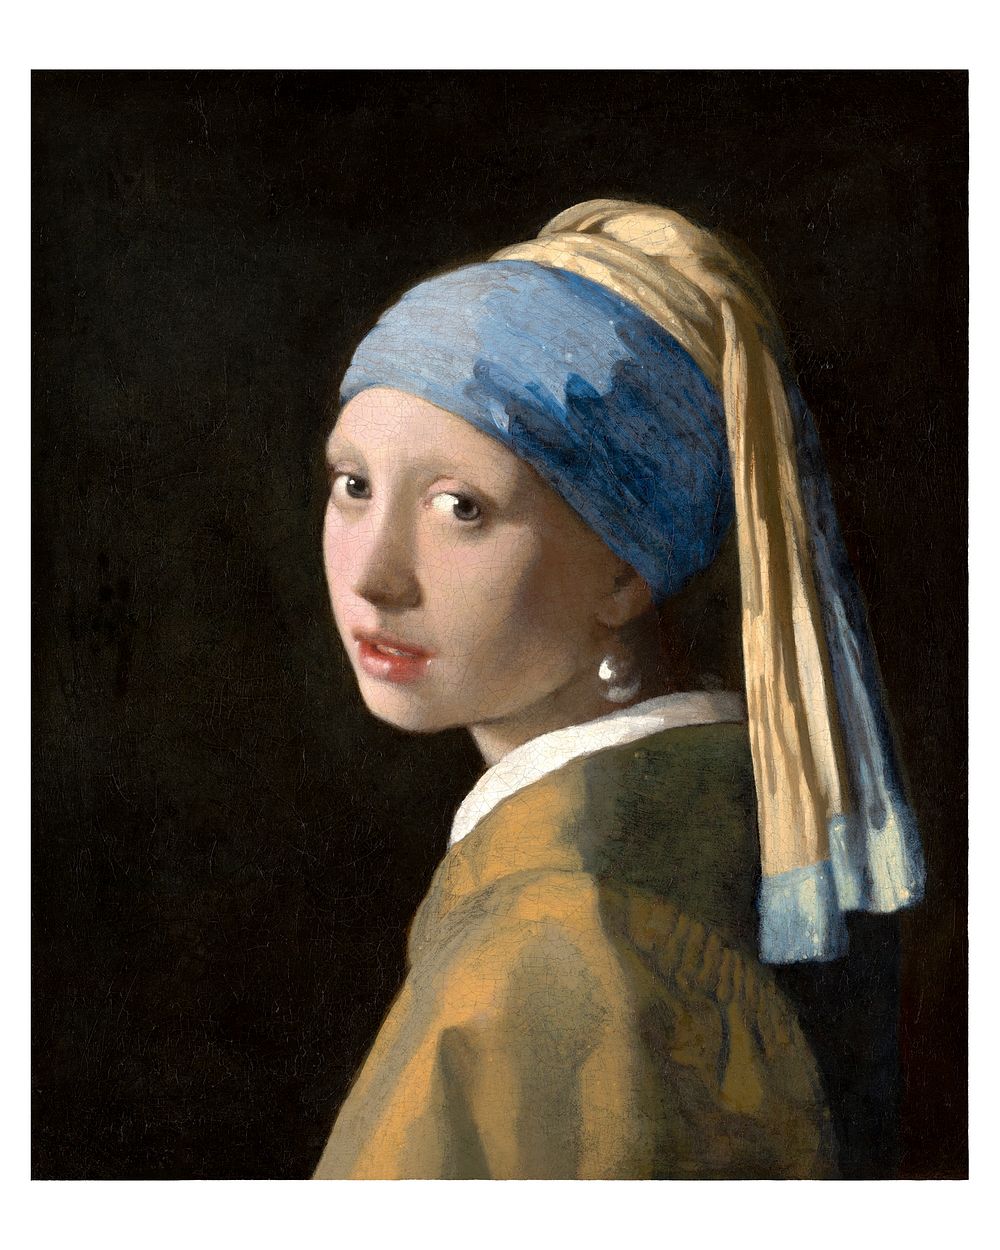 Pearl Earring art print, Johannes Vermeer&rsquo;s famous Girl with a Pearl Earring (ca. 1665) painting. Original from the…